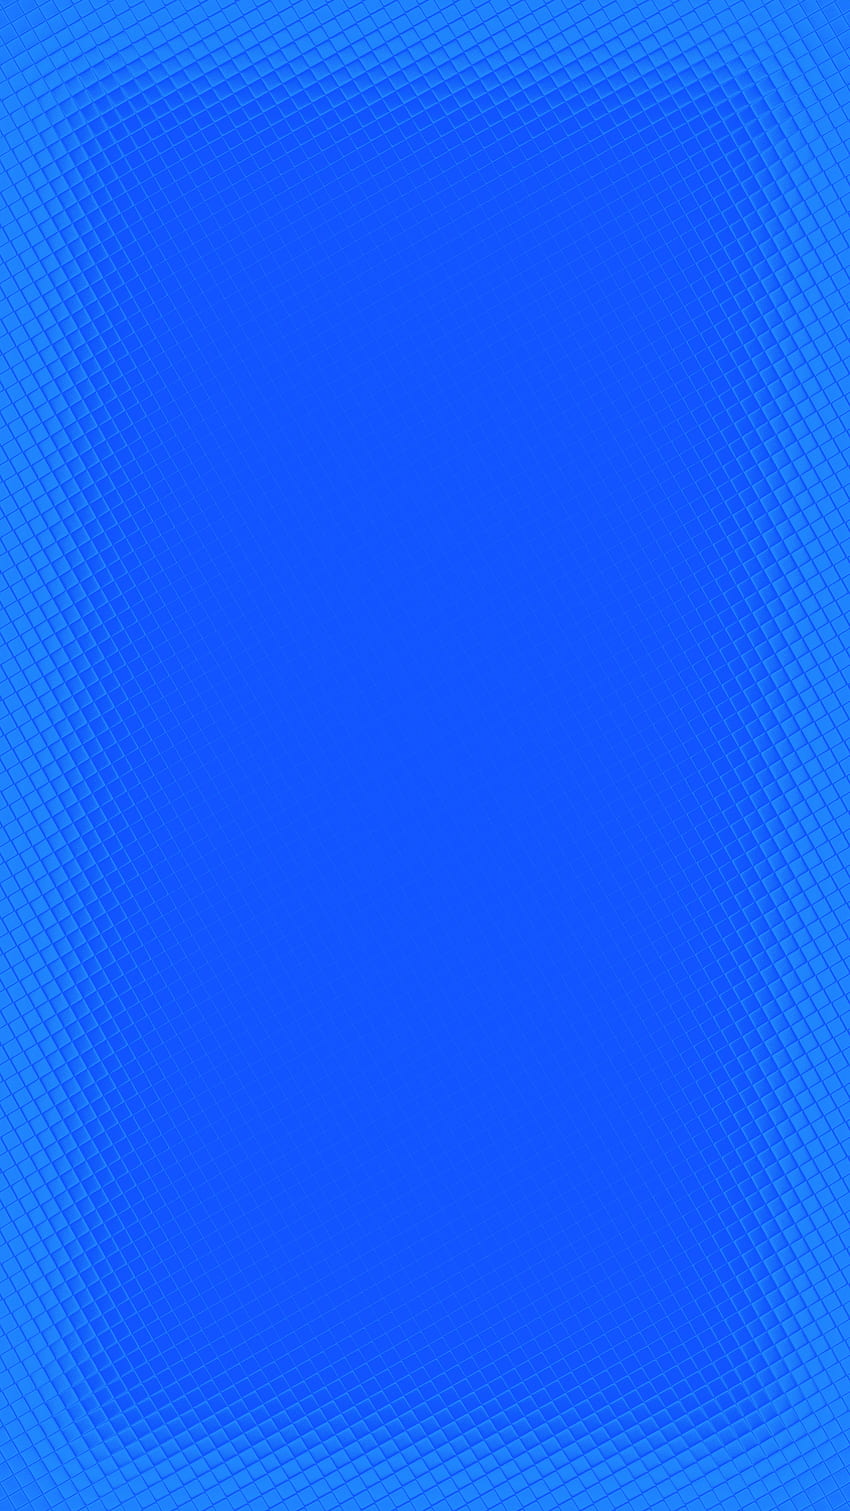 Special bue , Sony, Space, Windows11, iPhone, sky, electric blue, Art Design, Award Winner, Cool, LED, Soft, Asus, Simple, elax, samsung, Apple iPhone 16, Colors, S21, blue, HTC, Nice, Lockscreen, LG, A51 HD phone wallpaper